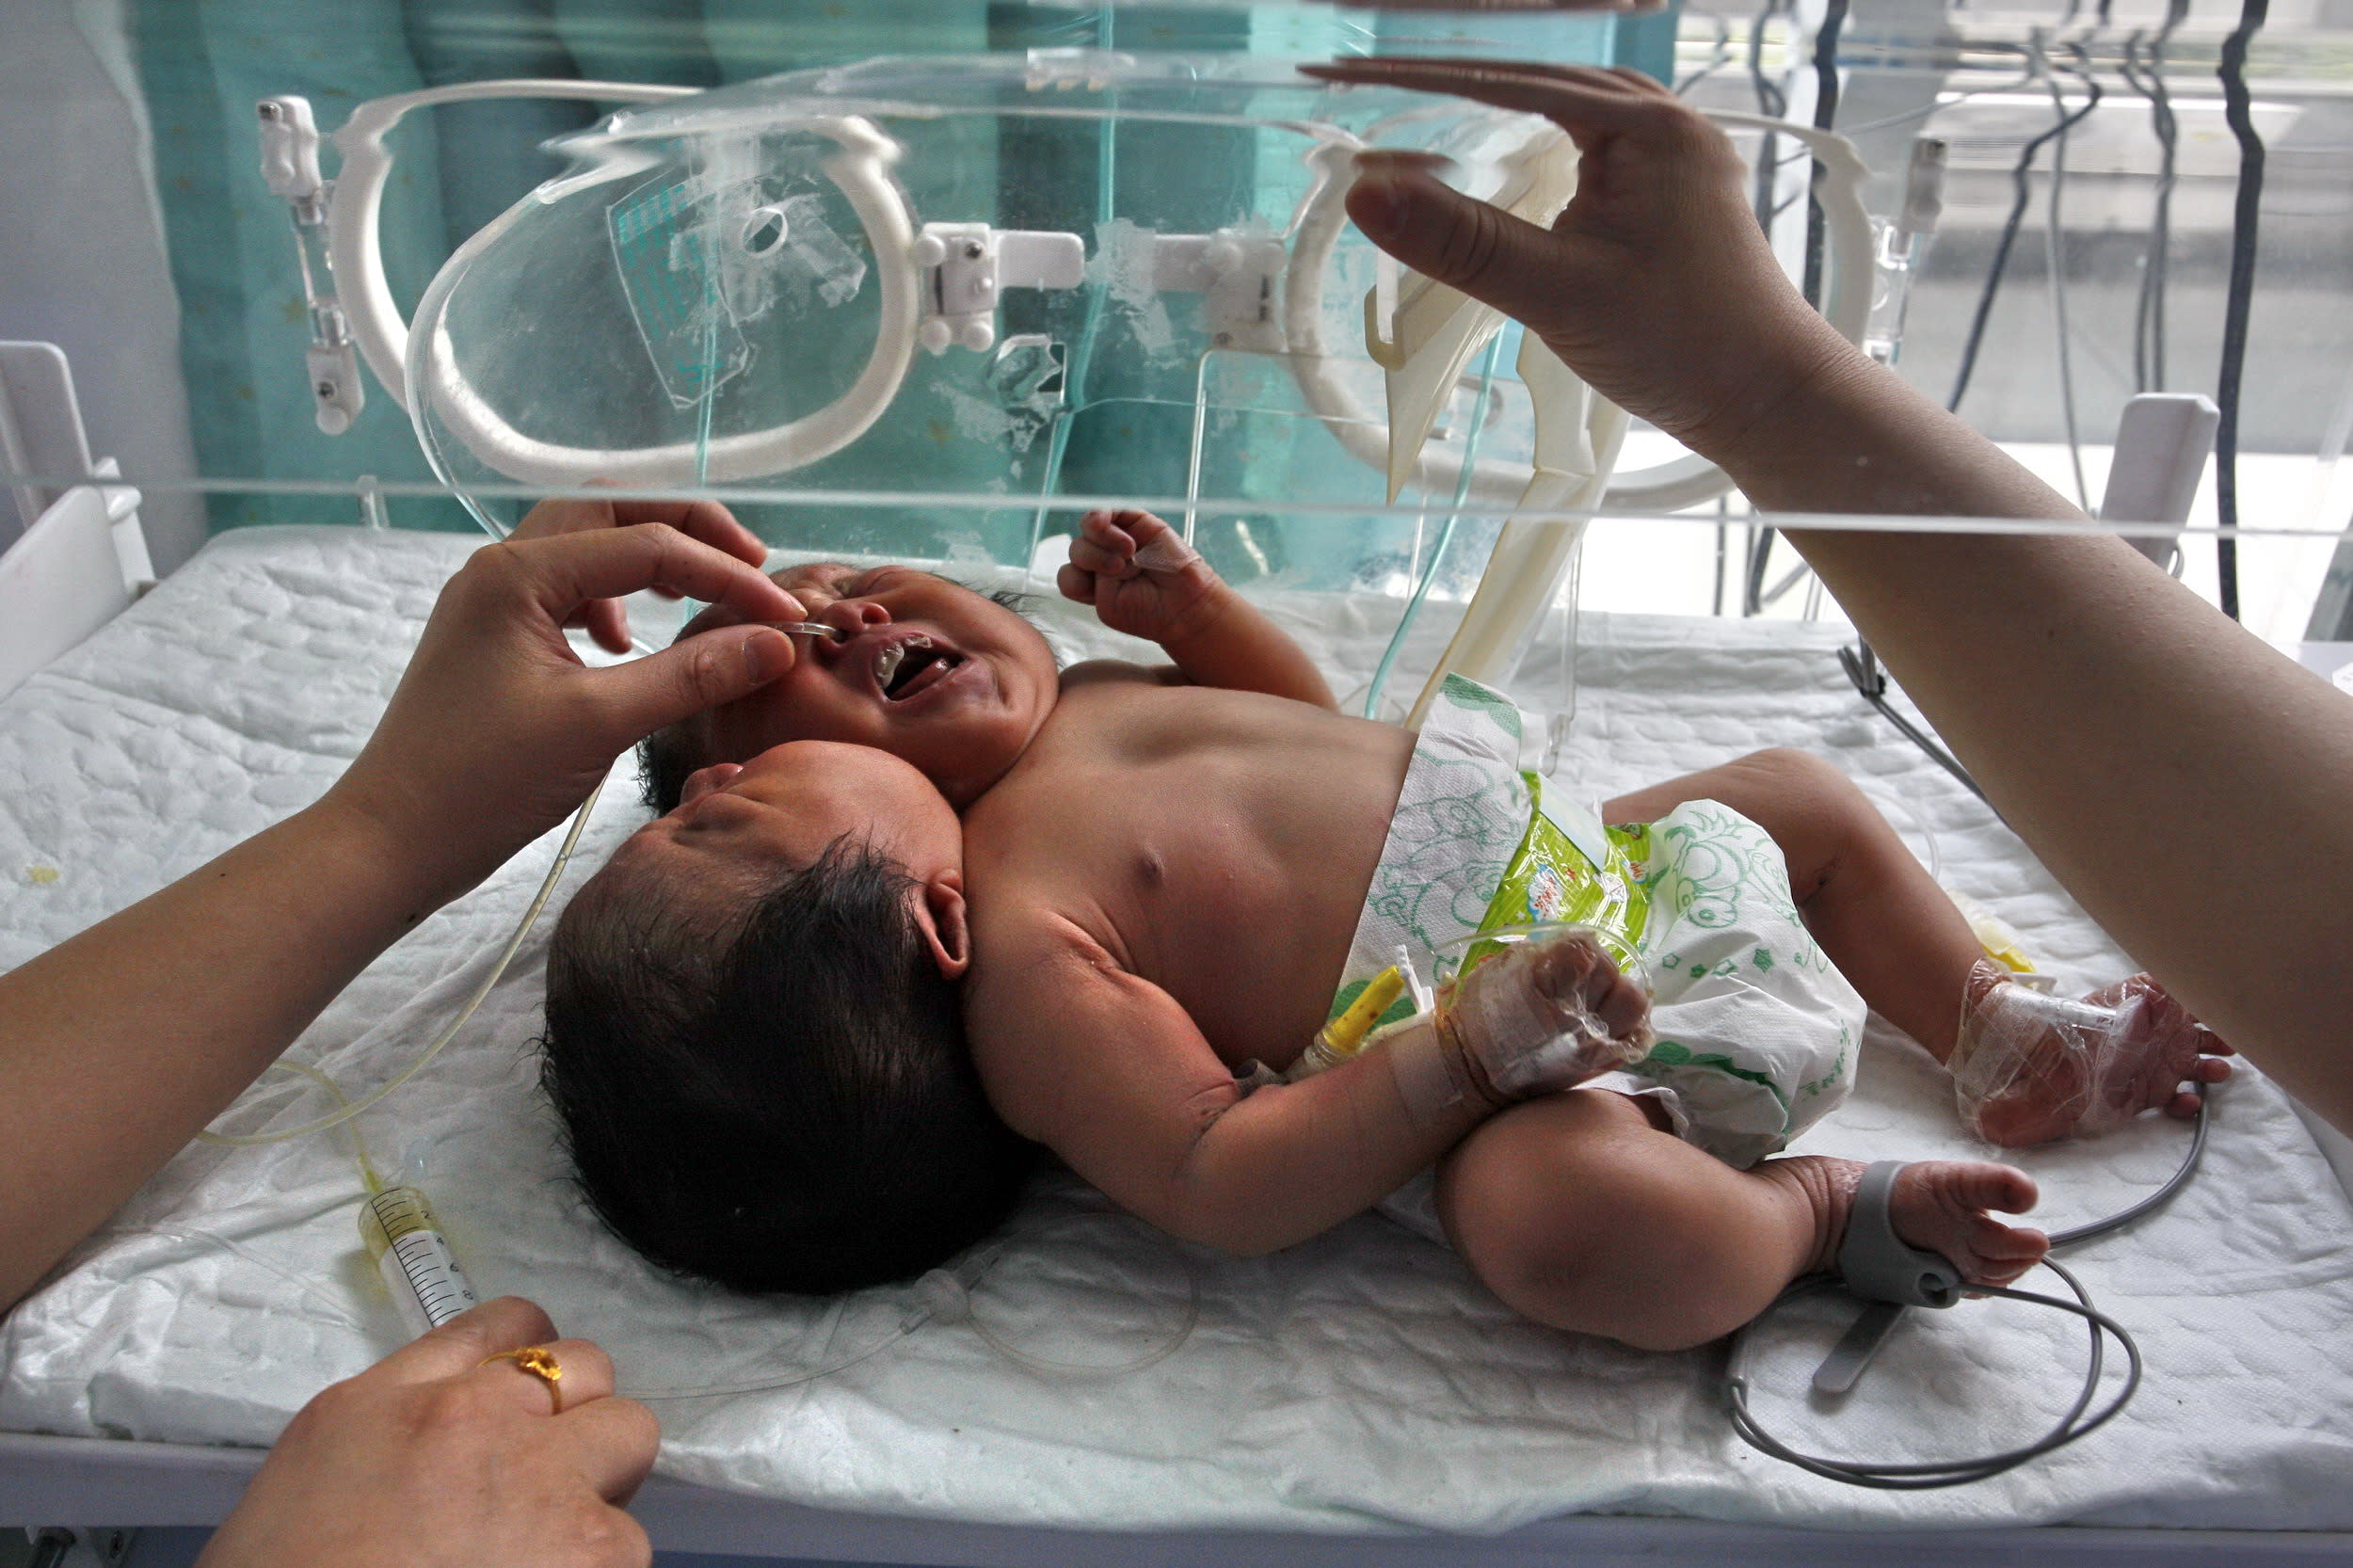 In this photo taken Monday, May 9, 2011, medical workers attend to conjoined twin babies with a single body and two heads born on May 5 in a hospital in Suining city in southwestern China's Sichuan province. The local Huaxi Metropolis Daily says the twins weighed nine pounds (4 kg) and measured 20 inches (51 centimeters) and have two spines, two esophaguses and shared other organs. Doctors were quoted as saying it would be nearly impossible to separate them.(AP Photo) CHINA OUT